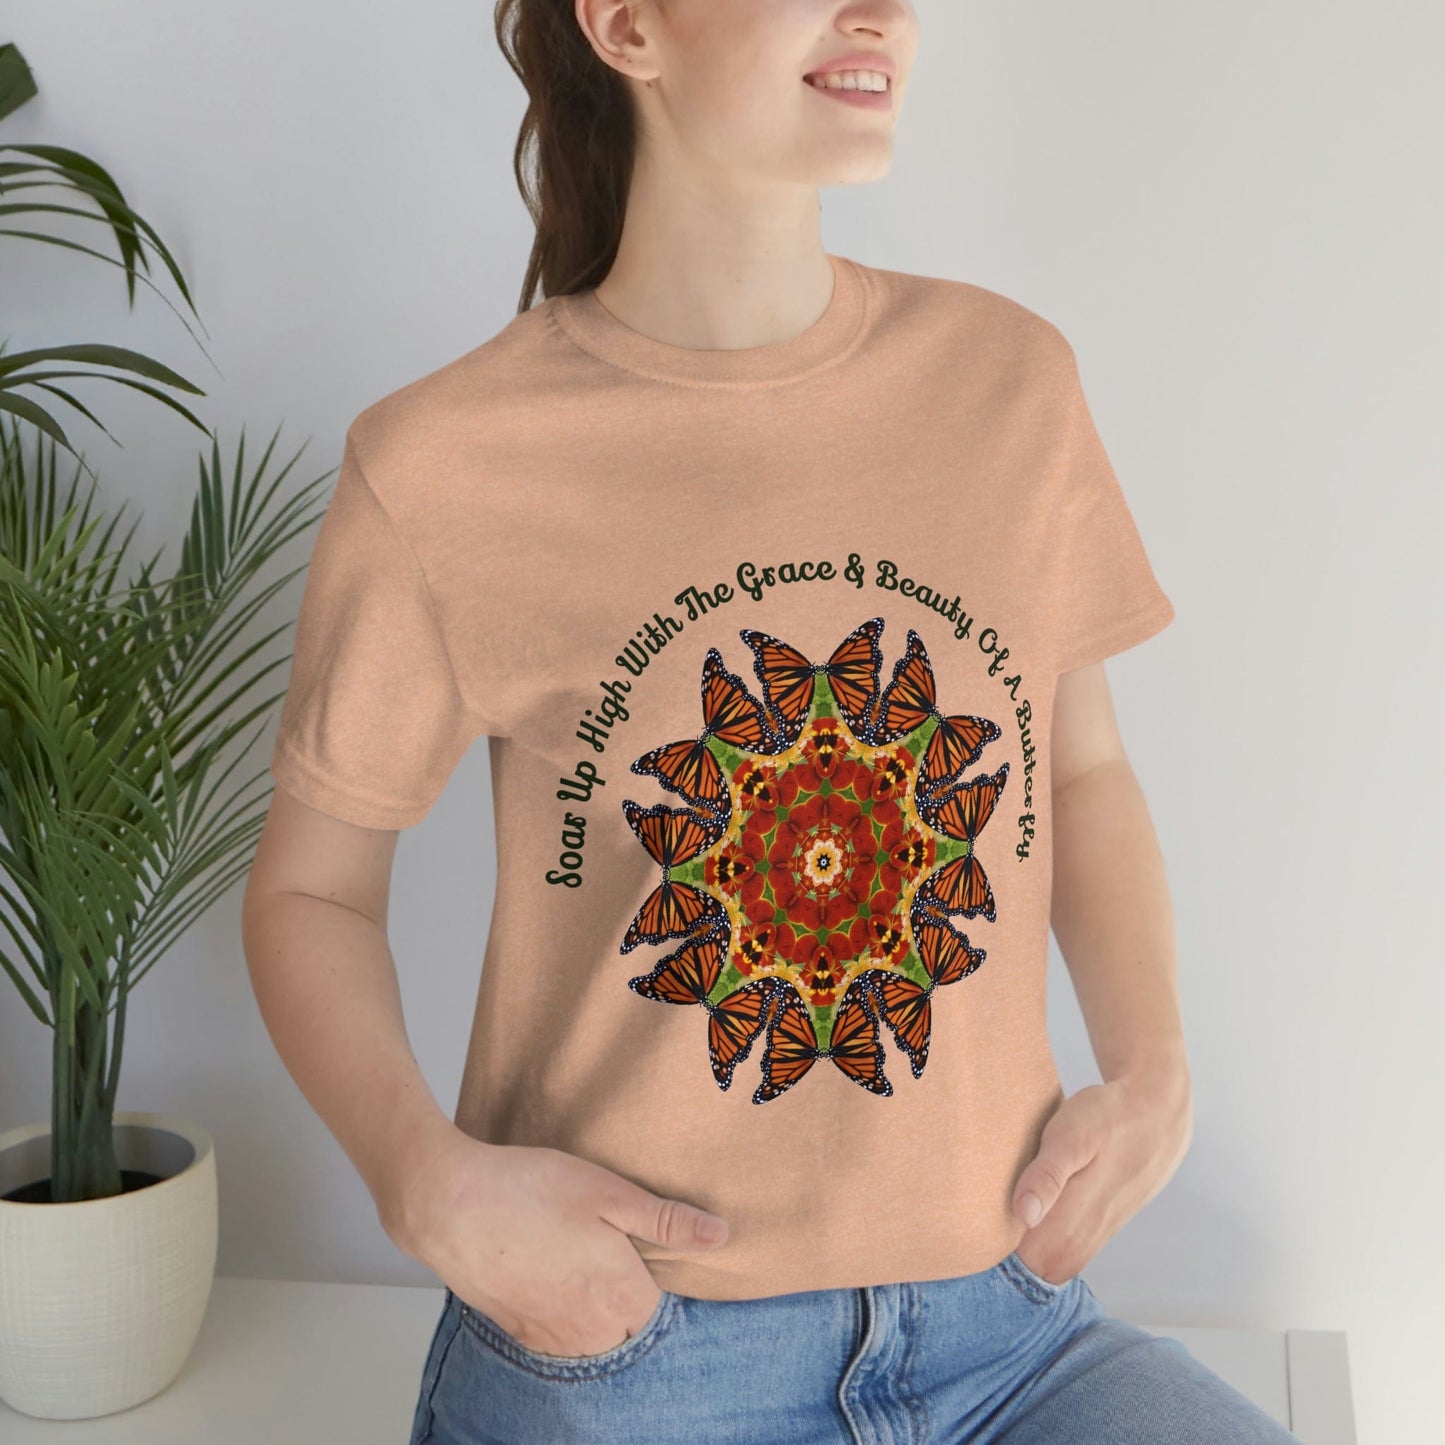 Monarch Butterfly Top, Zen Mystical Poet Shirt, Cute Shirts Soar Up High With The Grace & Beauty Of A Butterfly